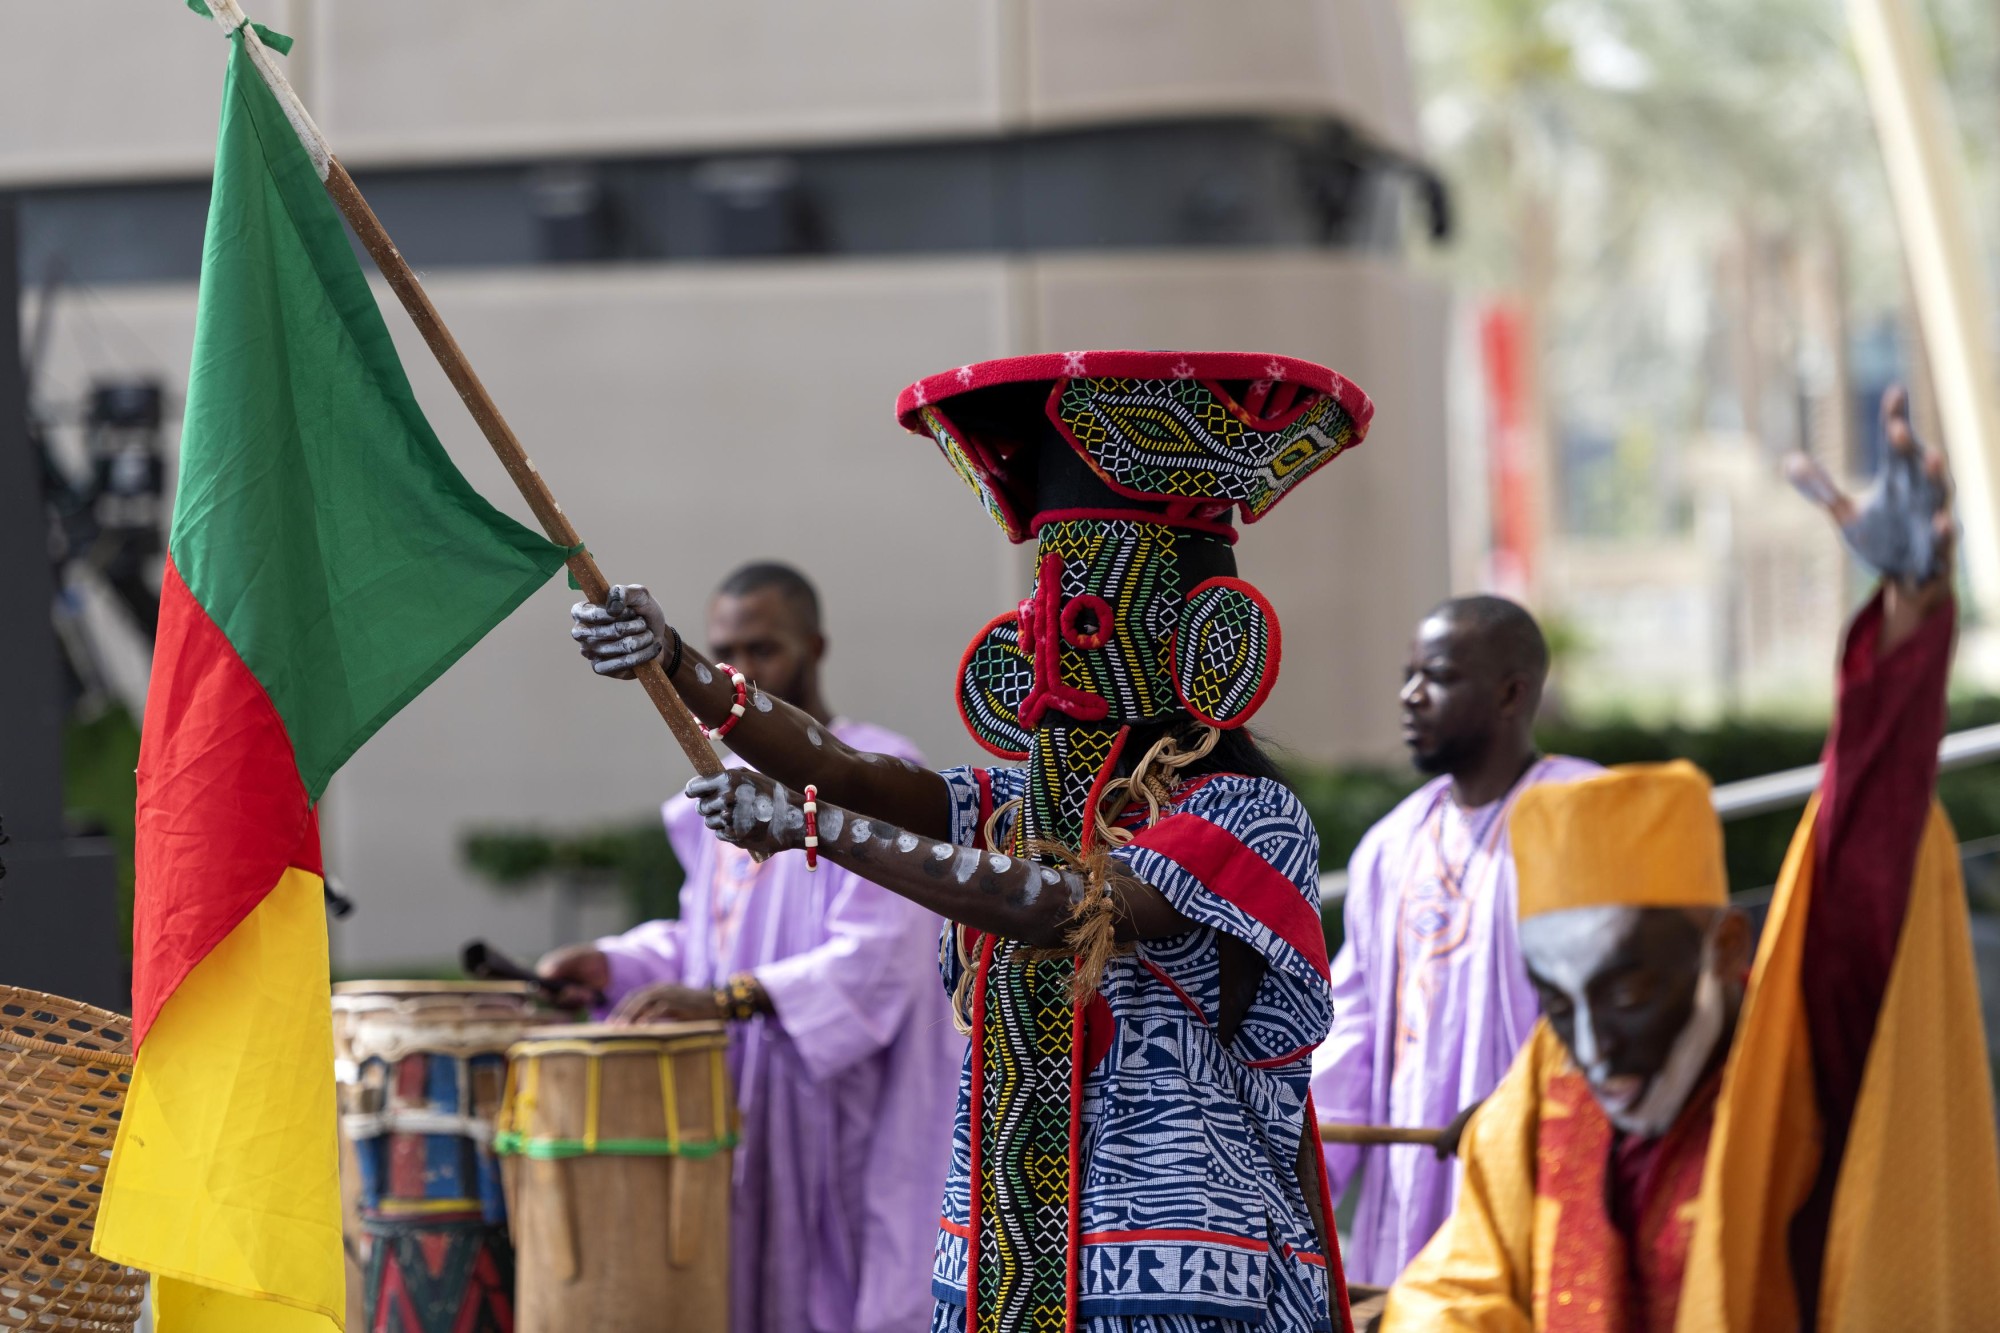 Cultural performance during the Cameroon National Day Ceremony at Al Wasl m62019